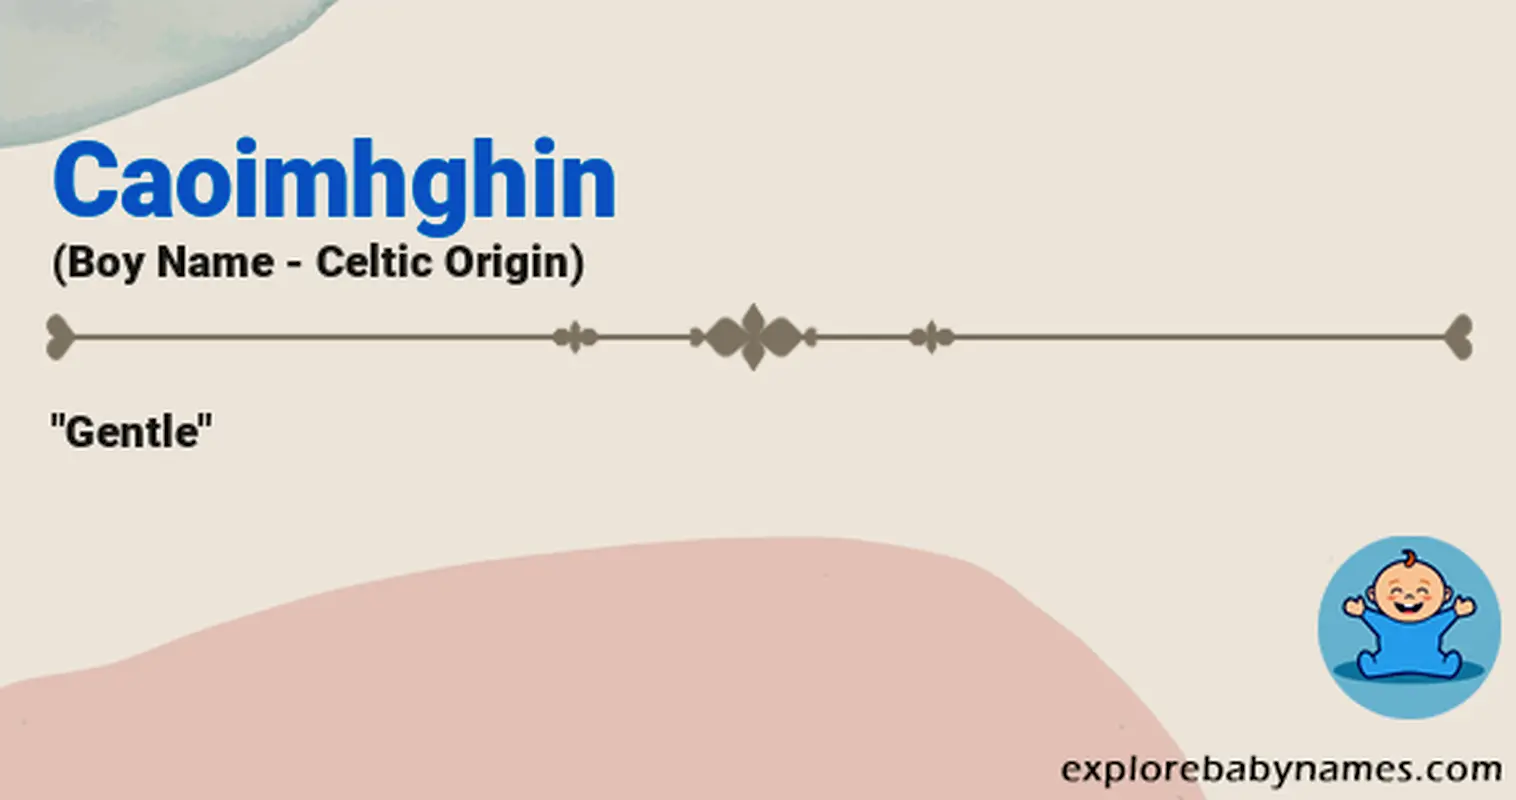 Meaning of Caoimhghin